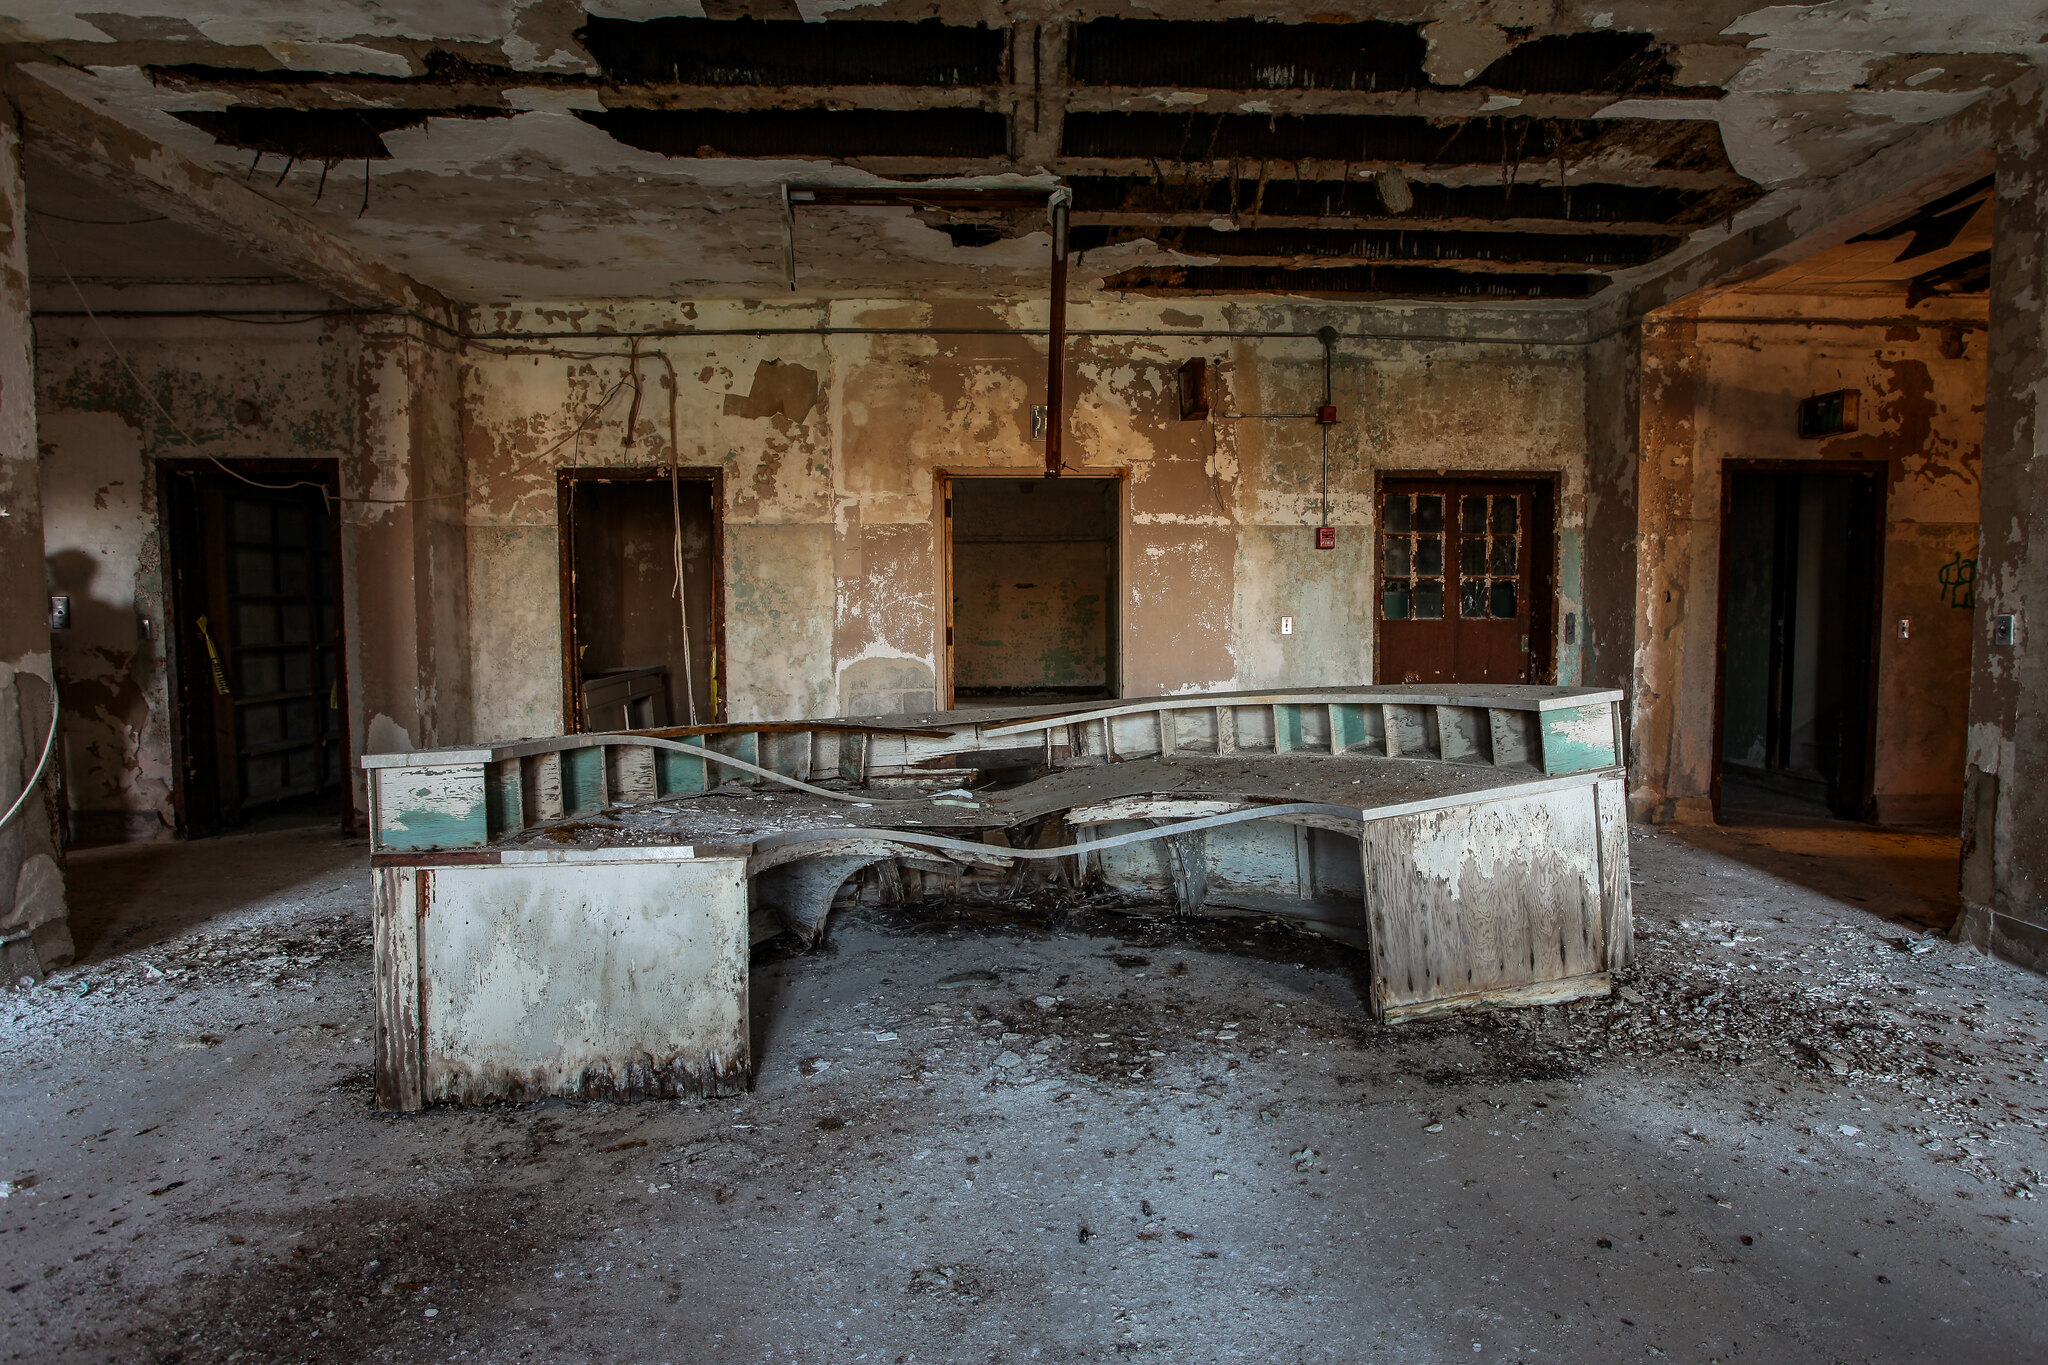 Central State Hospital